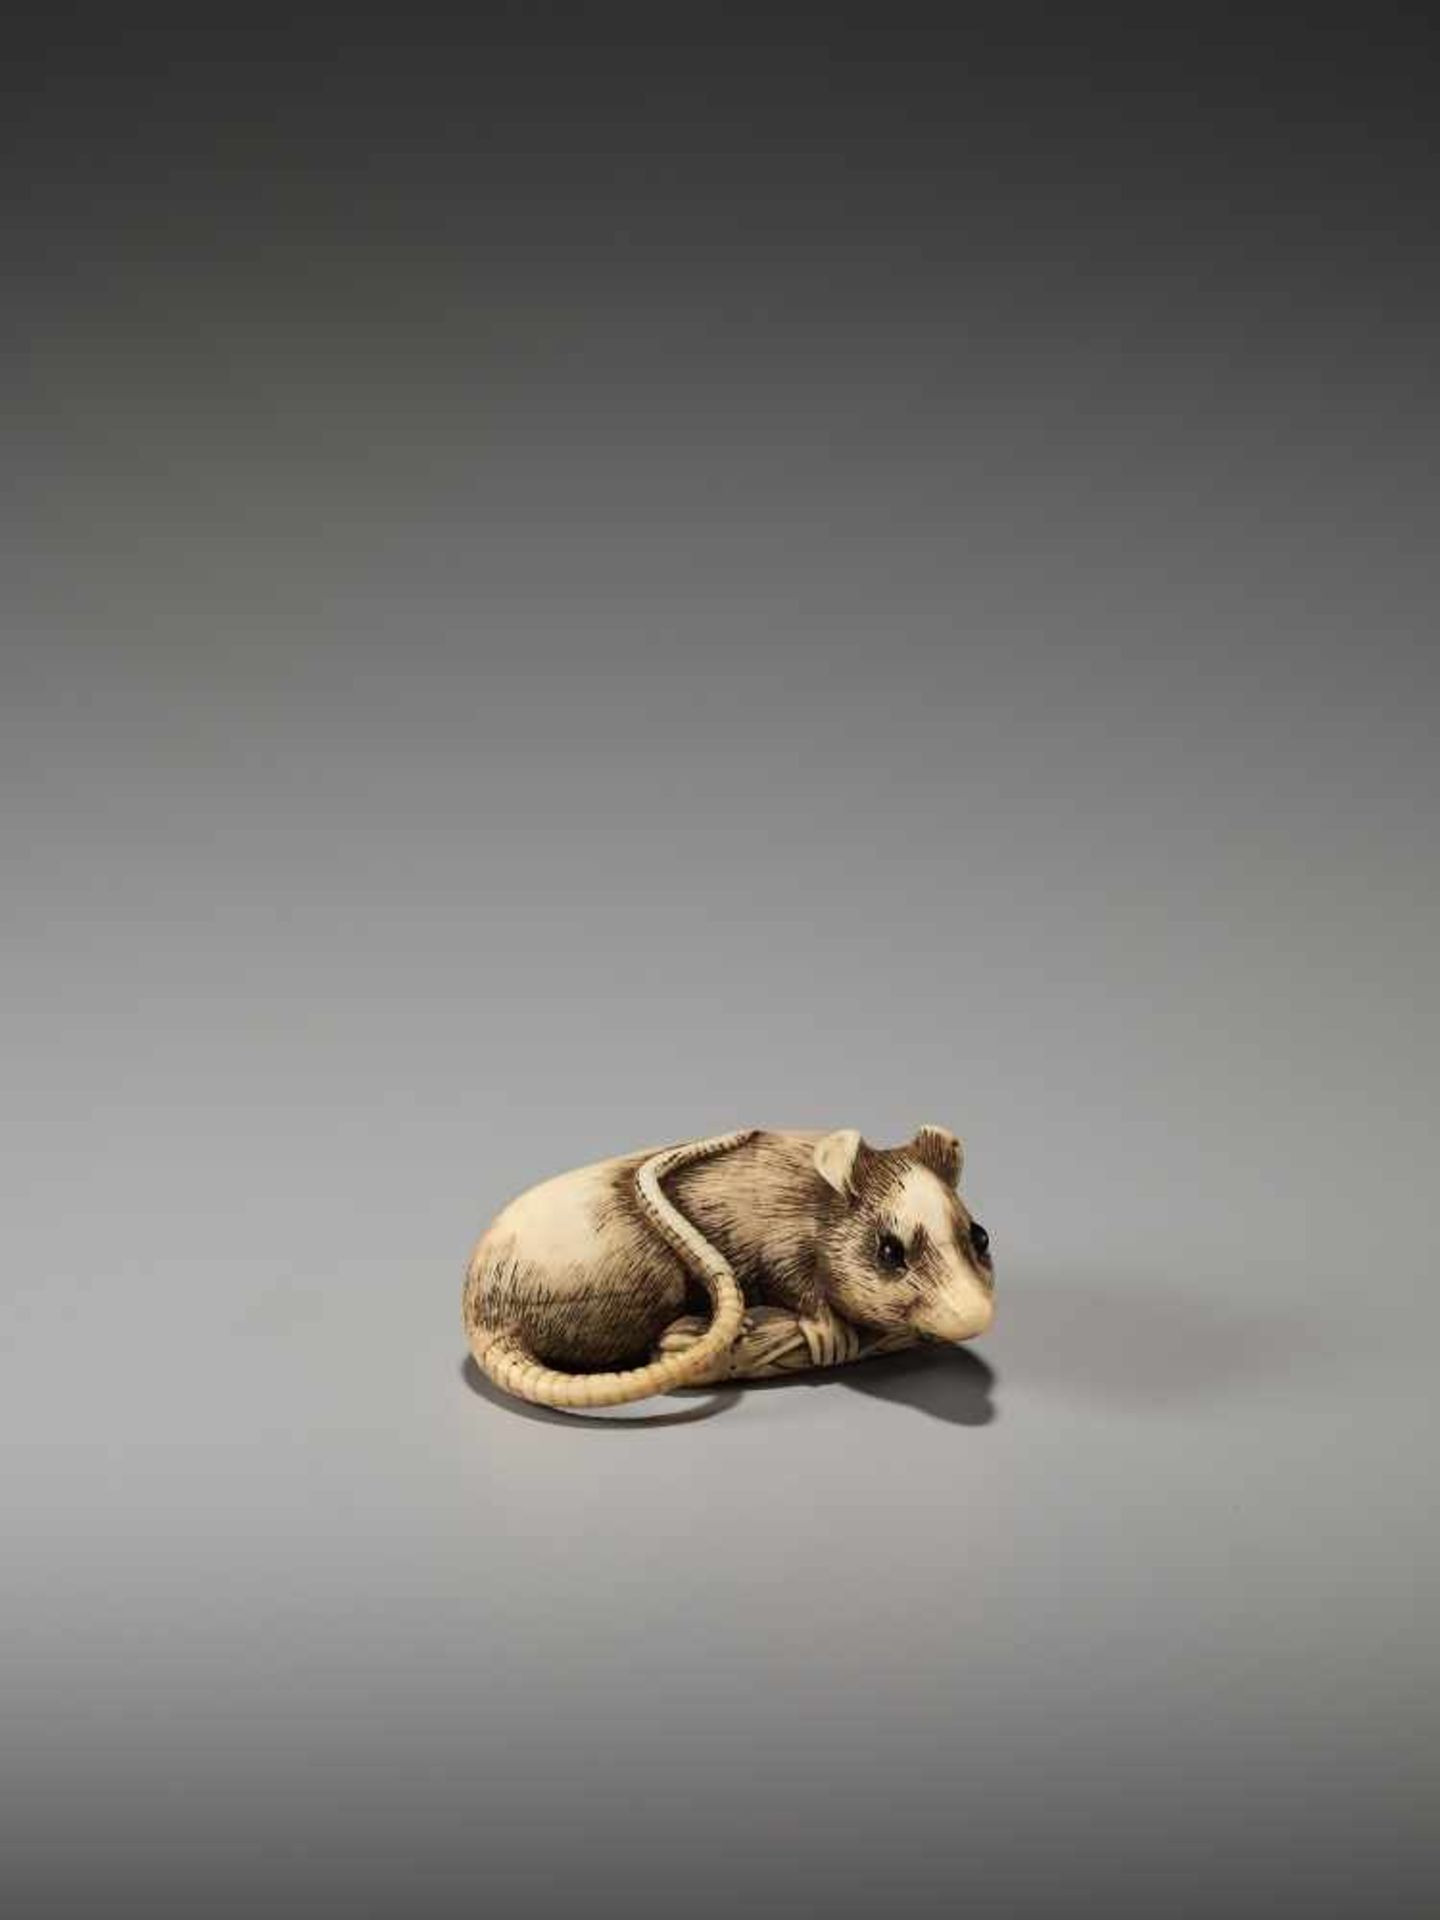 AN EXCELLENT IVORY NETSUKE OF A RAT WITH BAMBOO NODE BY SADAYOSHIBy Sadayoshi, ivory netsukeJapan, - Image 5 of 11